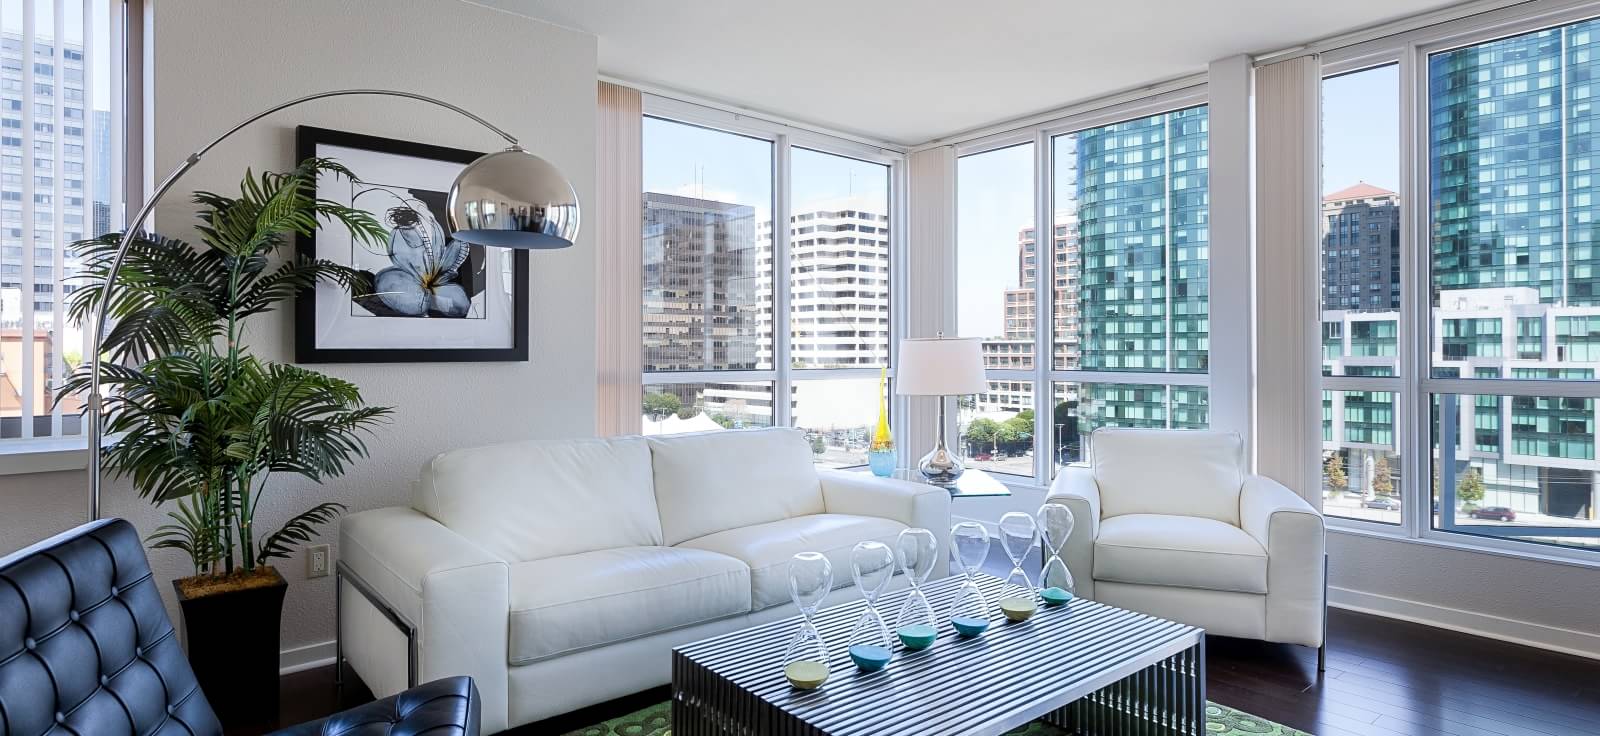 Luxury apartments in San Francisco